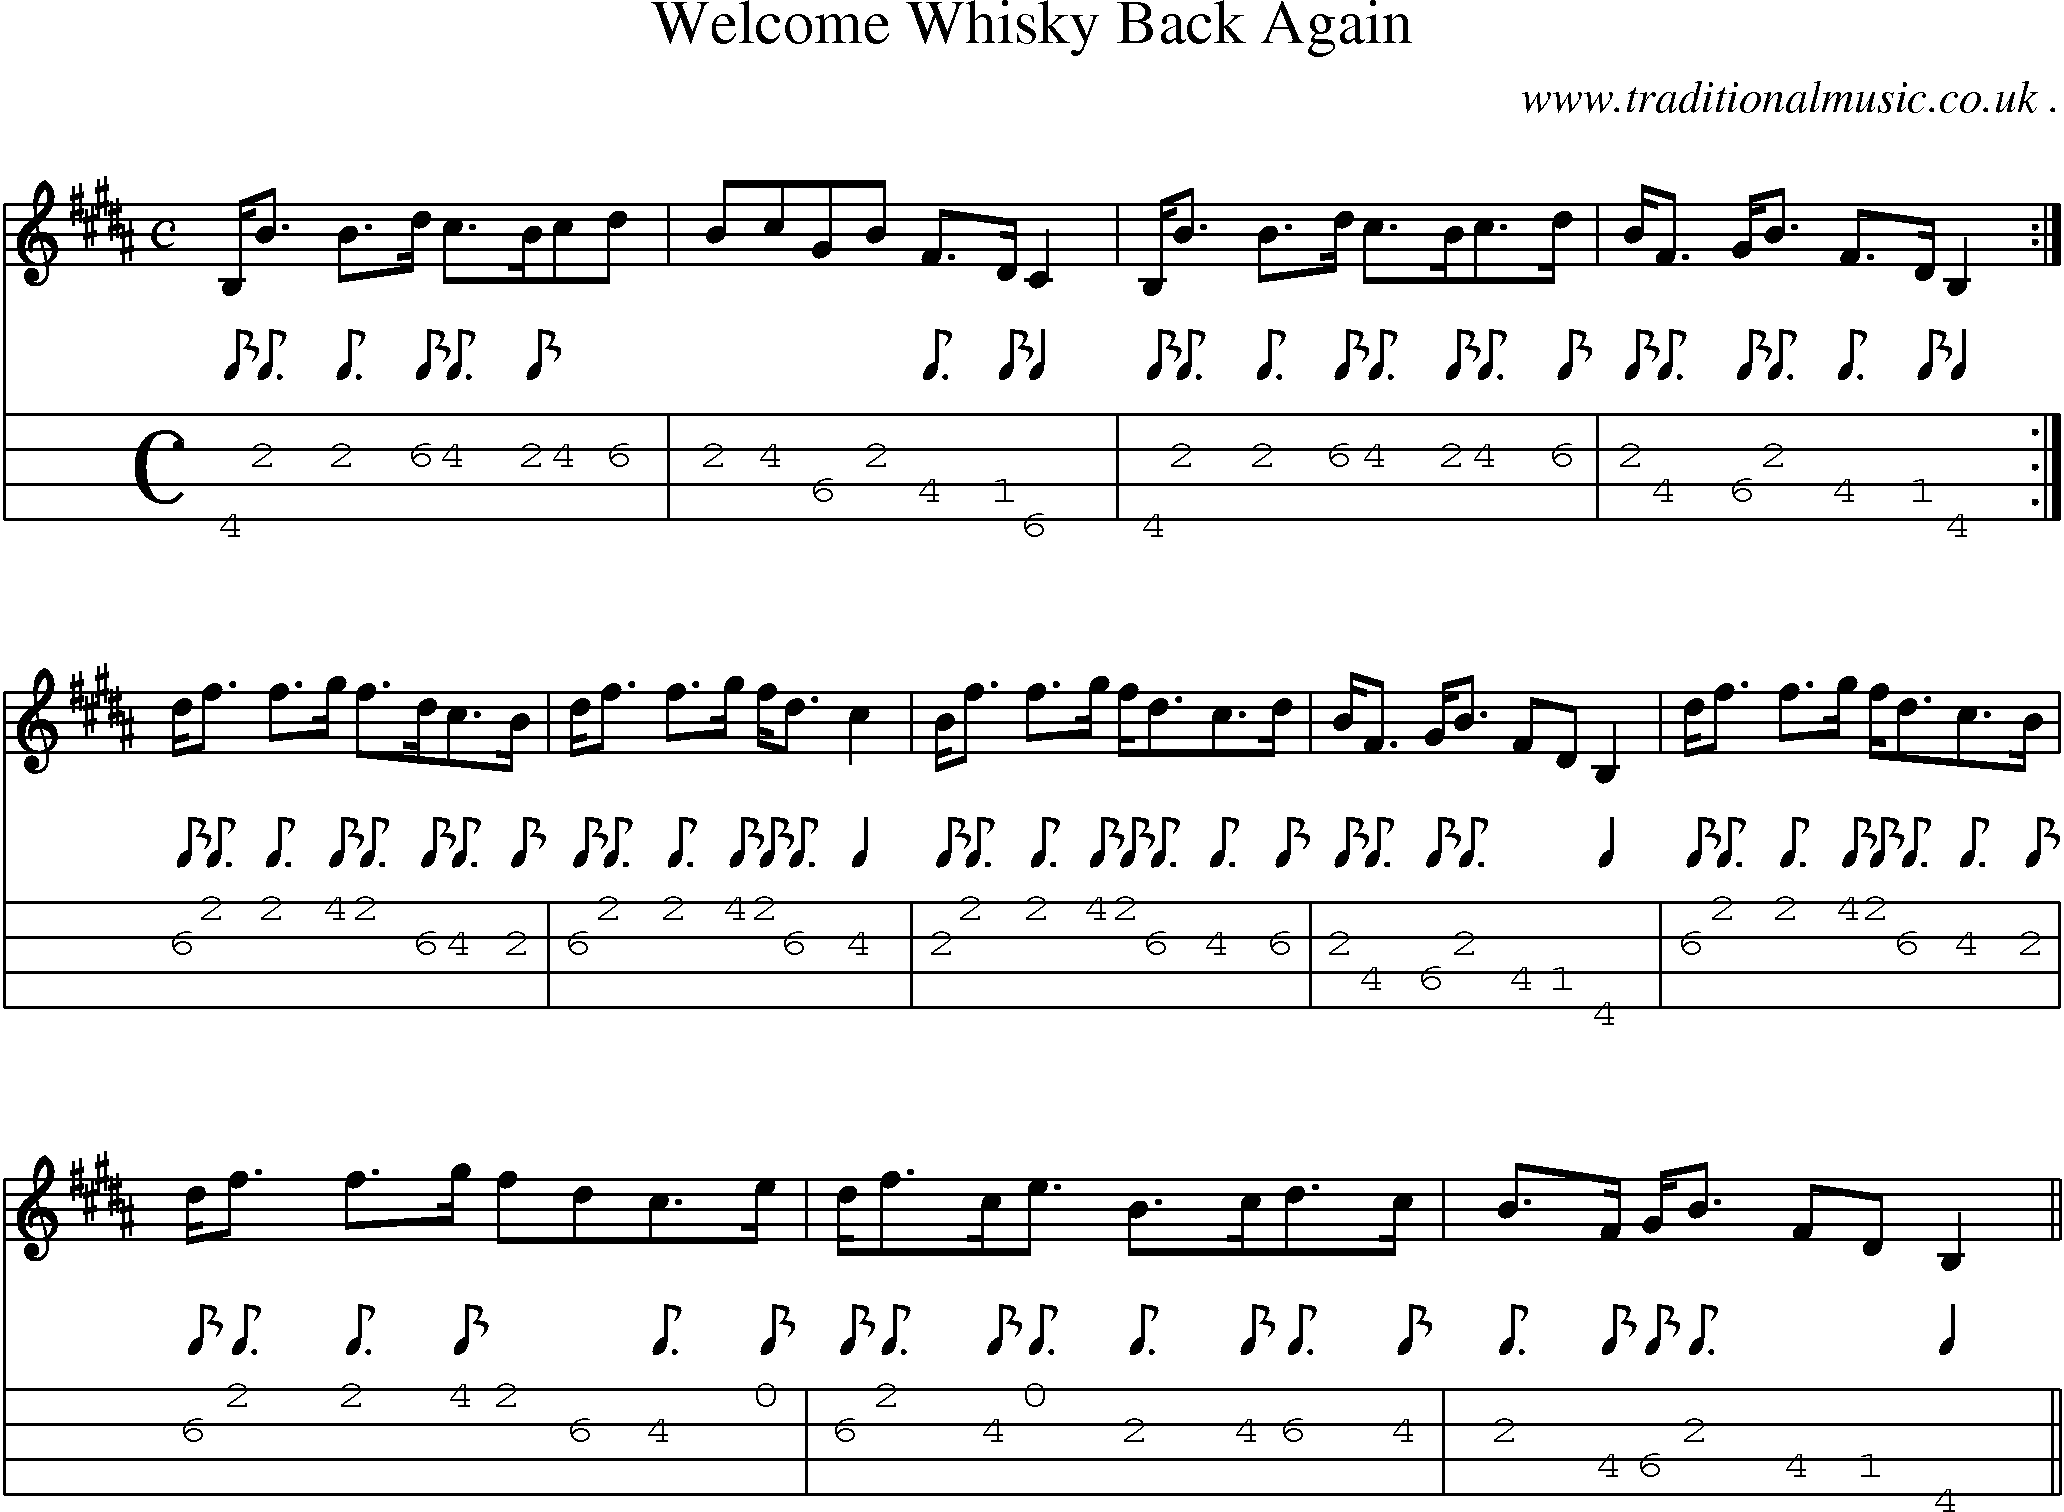 Sheet-music  score, Chords and Mandolin Tabs for Welcome Whisky Back Again